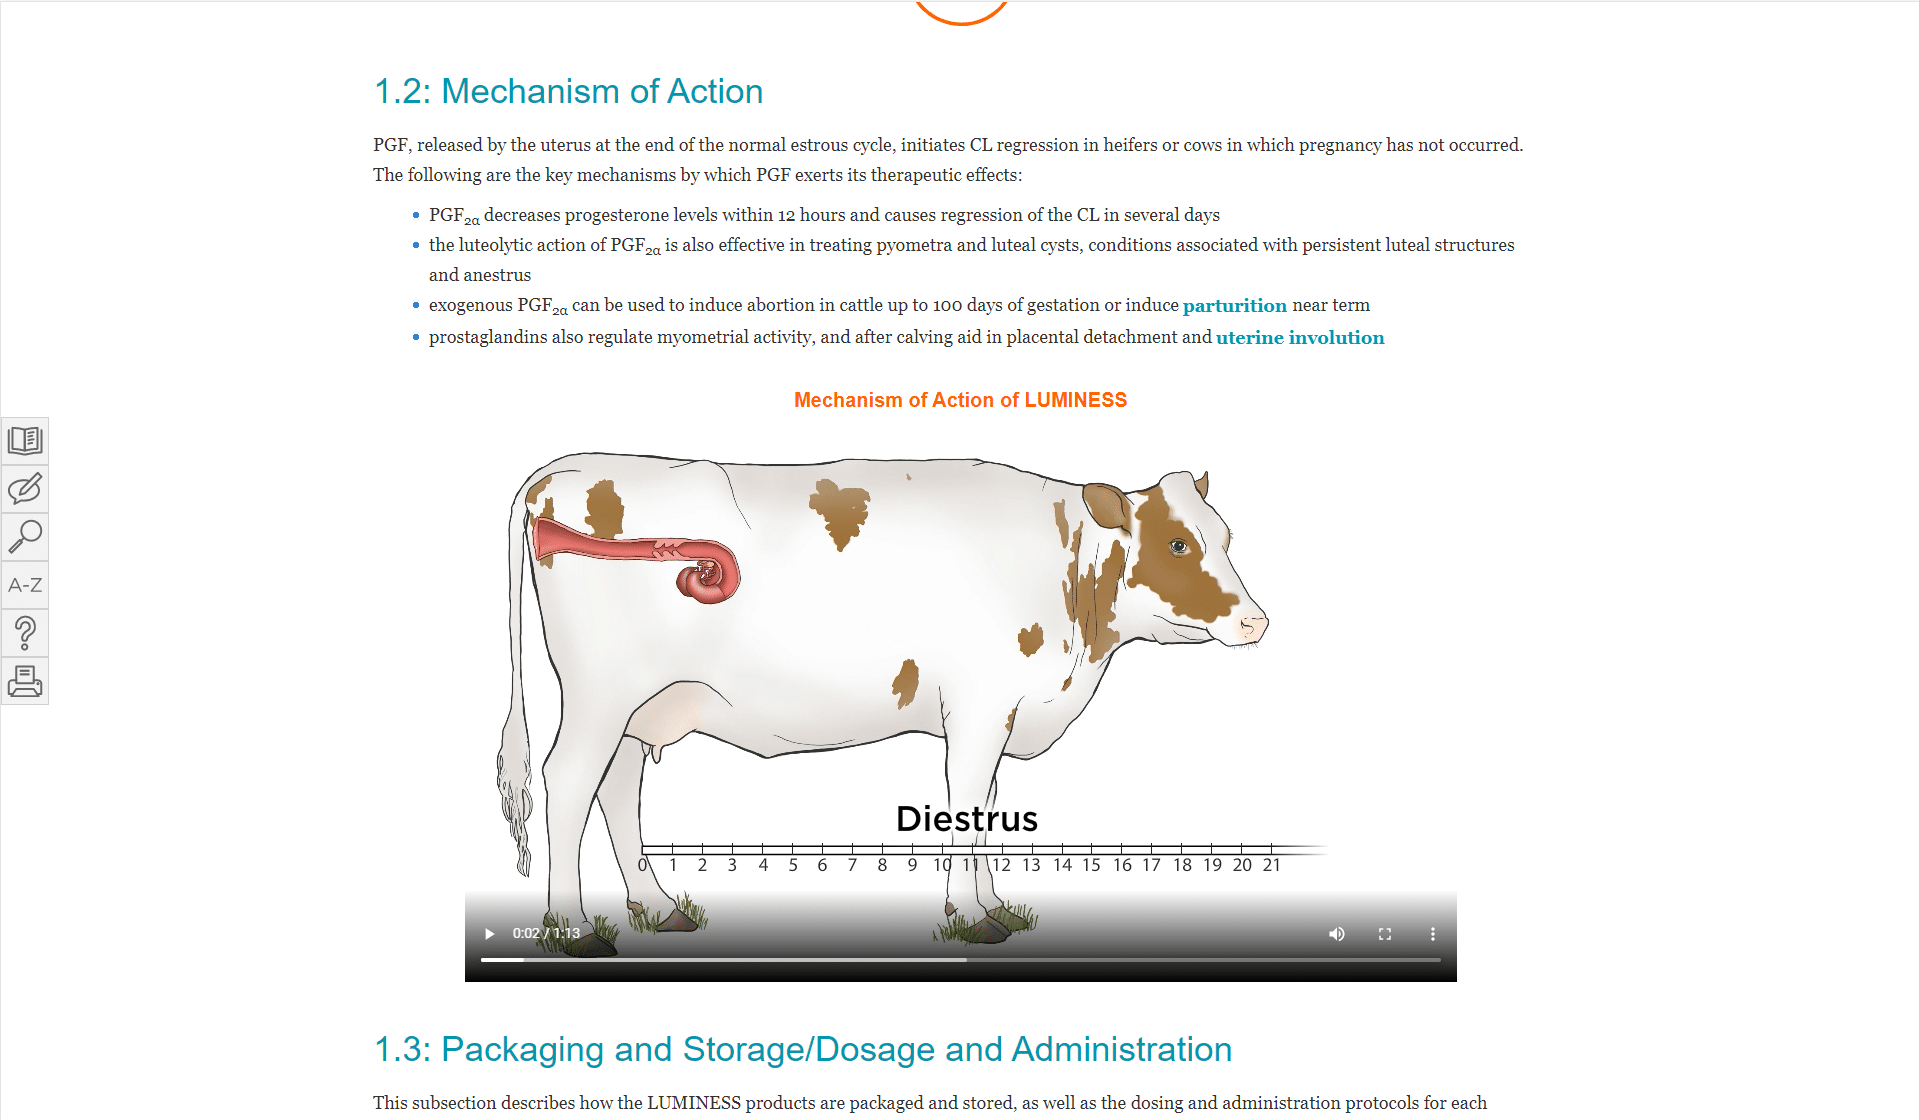 Beef & Dairy Cattle eLearning Example